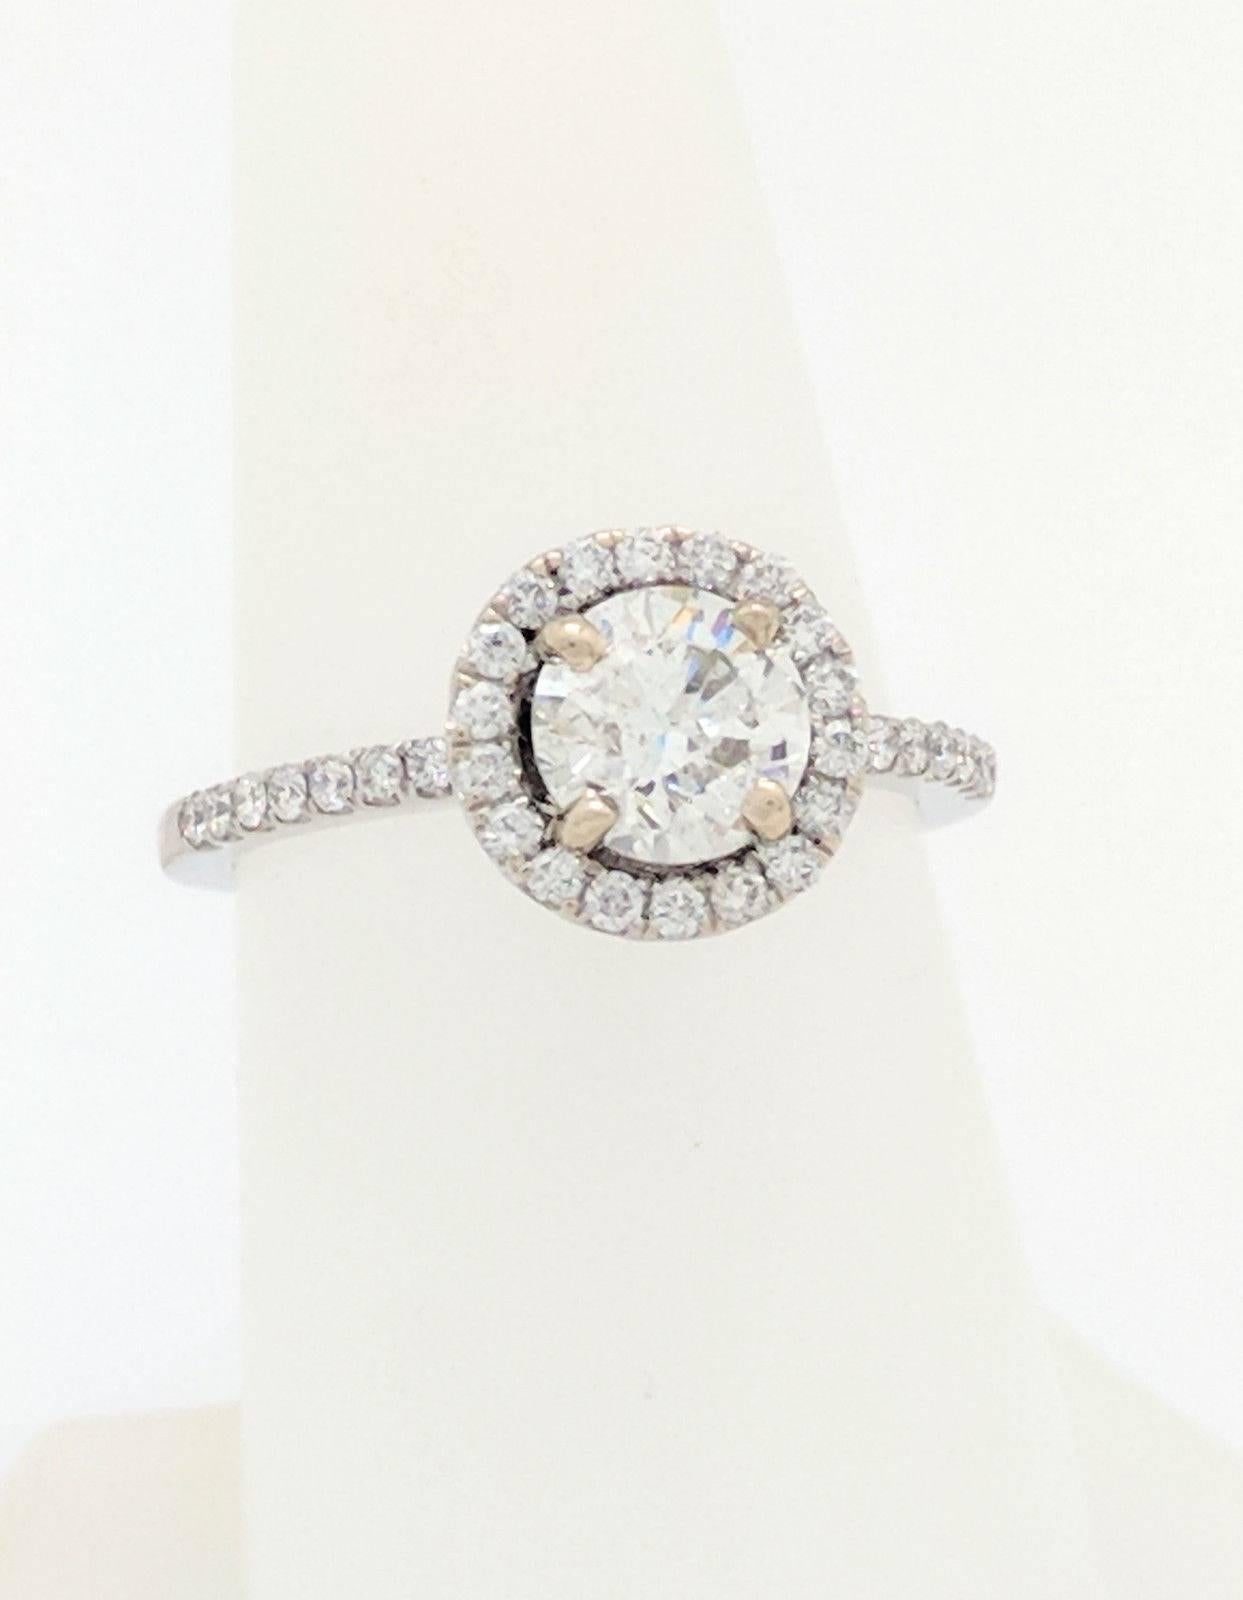 1.01ct. Round Brilliant Natural Diamond Halo Engagement Ring EGL Certified SI2/I

You are viewing a stunning 1.01ct. natural round brilliant cut diamond. This diamond is certified by EGL (EGL USA Gemological Institute) and has been graded as SI2 in